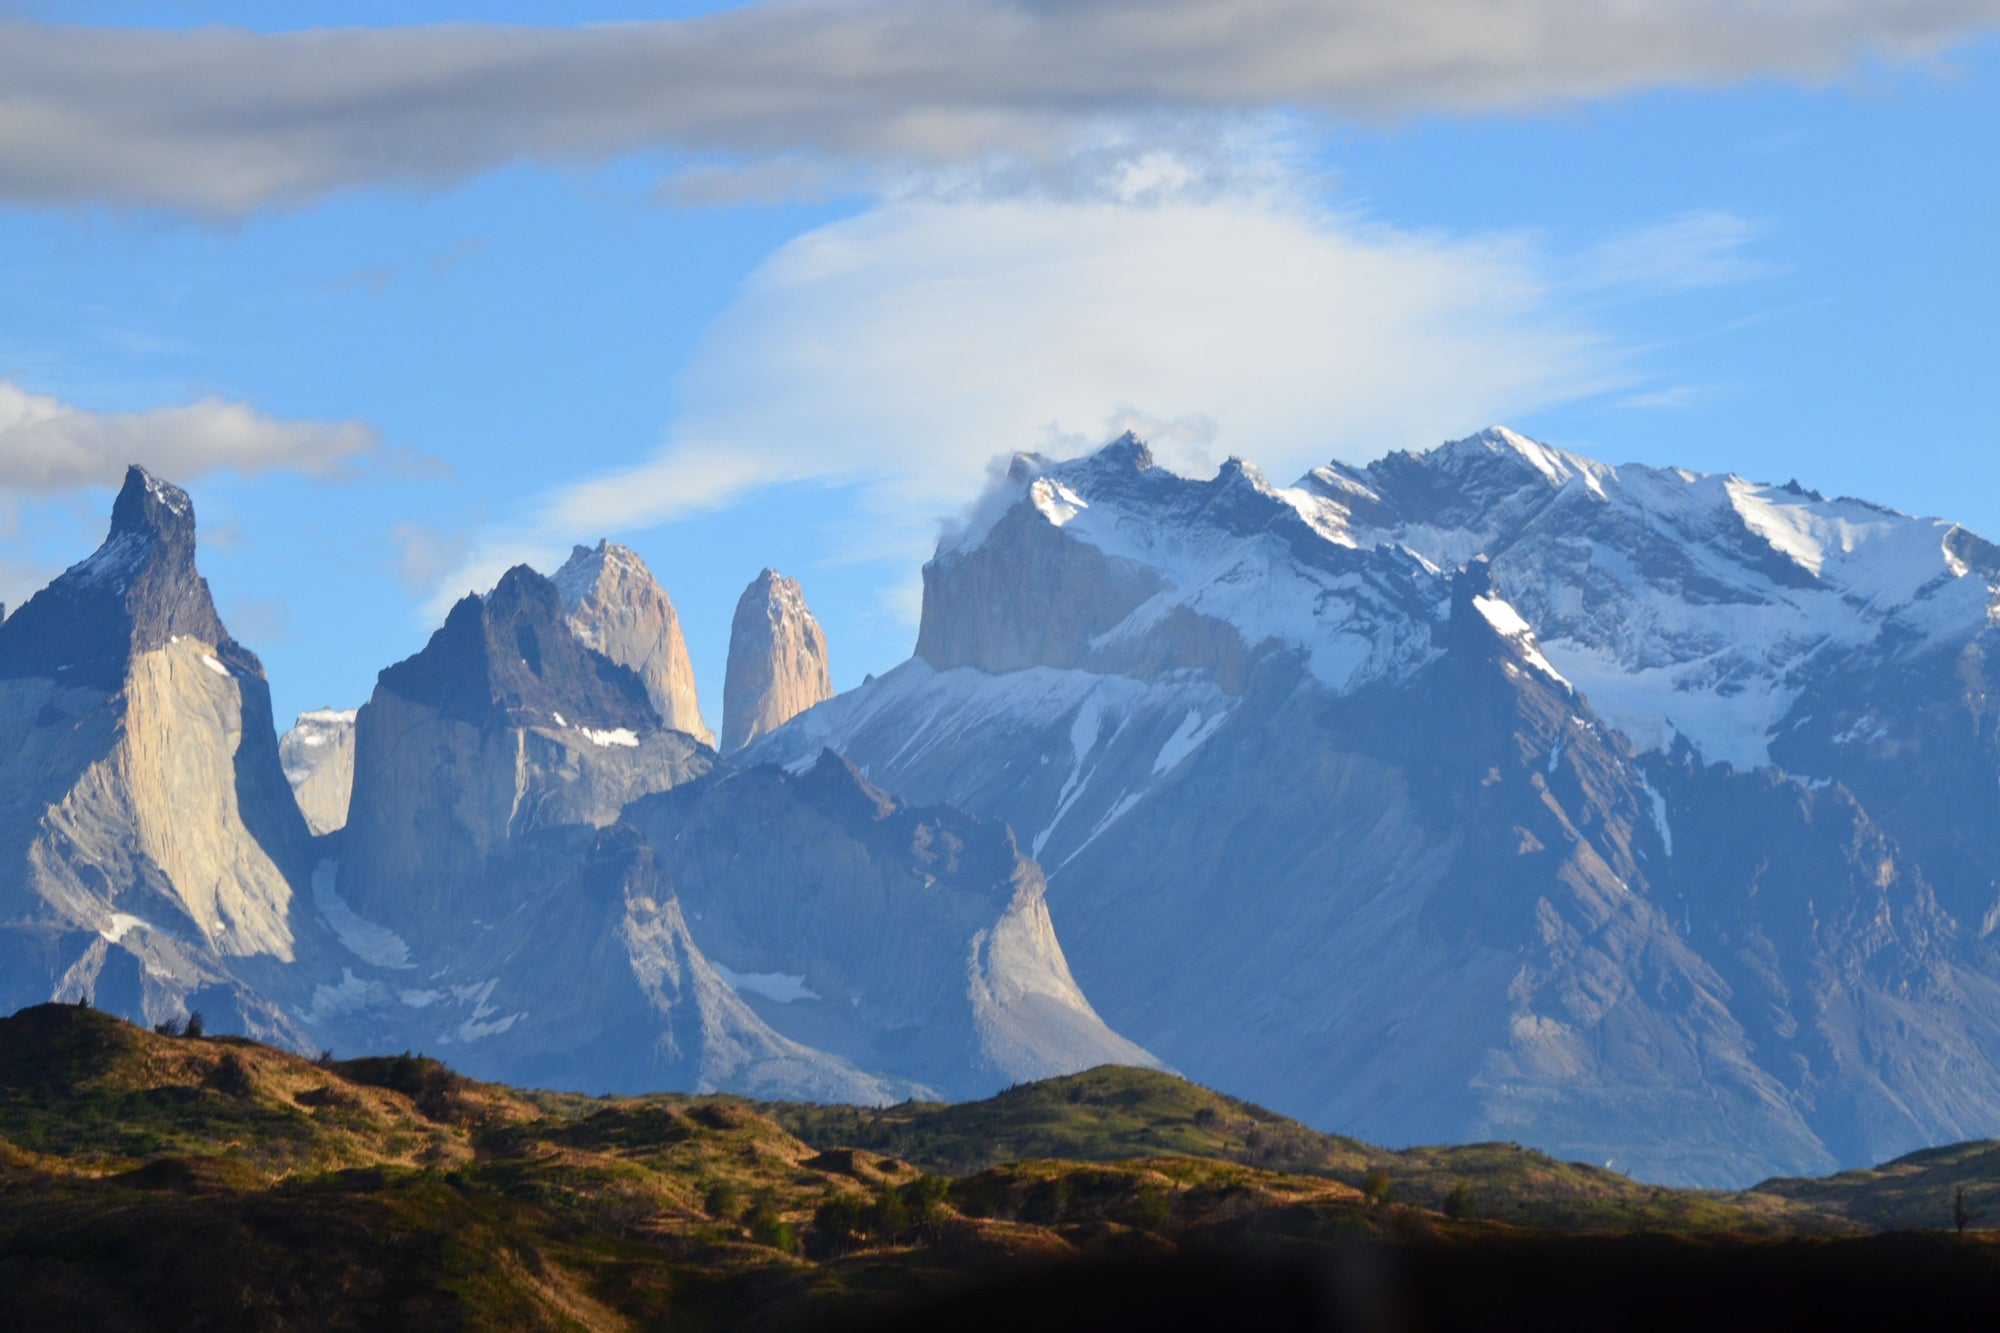 Starting Planning Your Trip to Chilean Patagonia